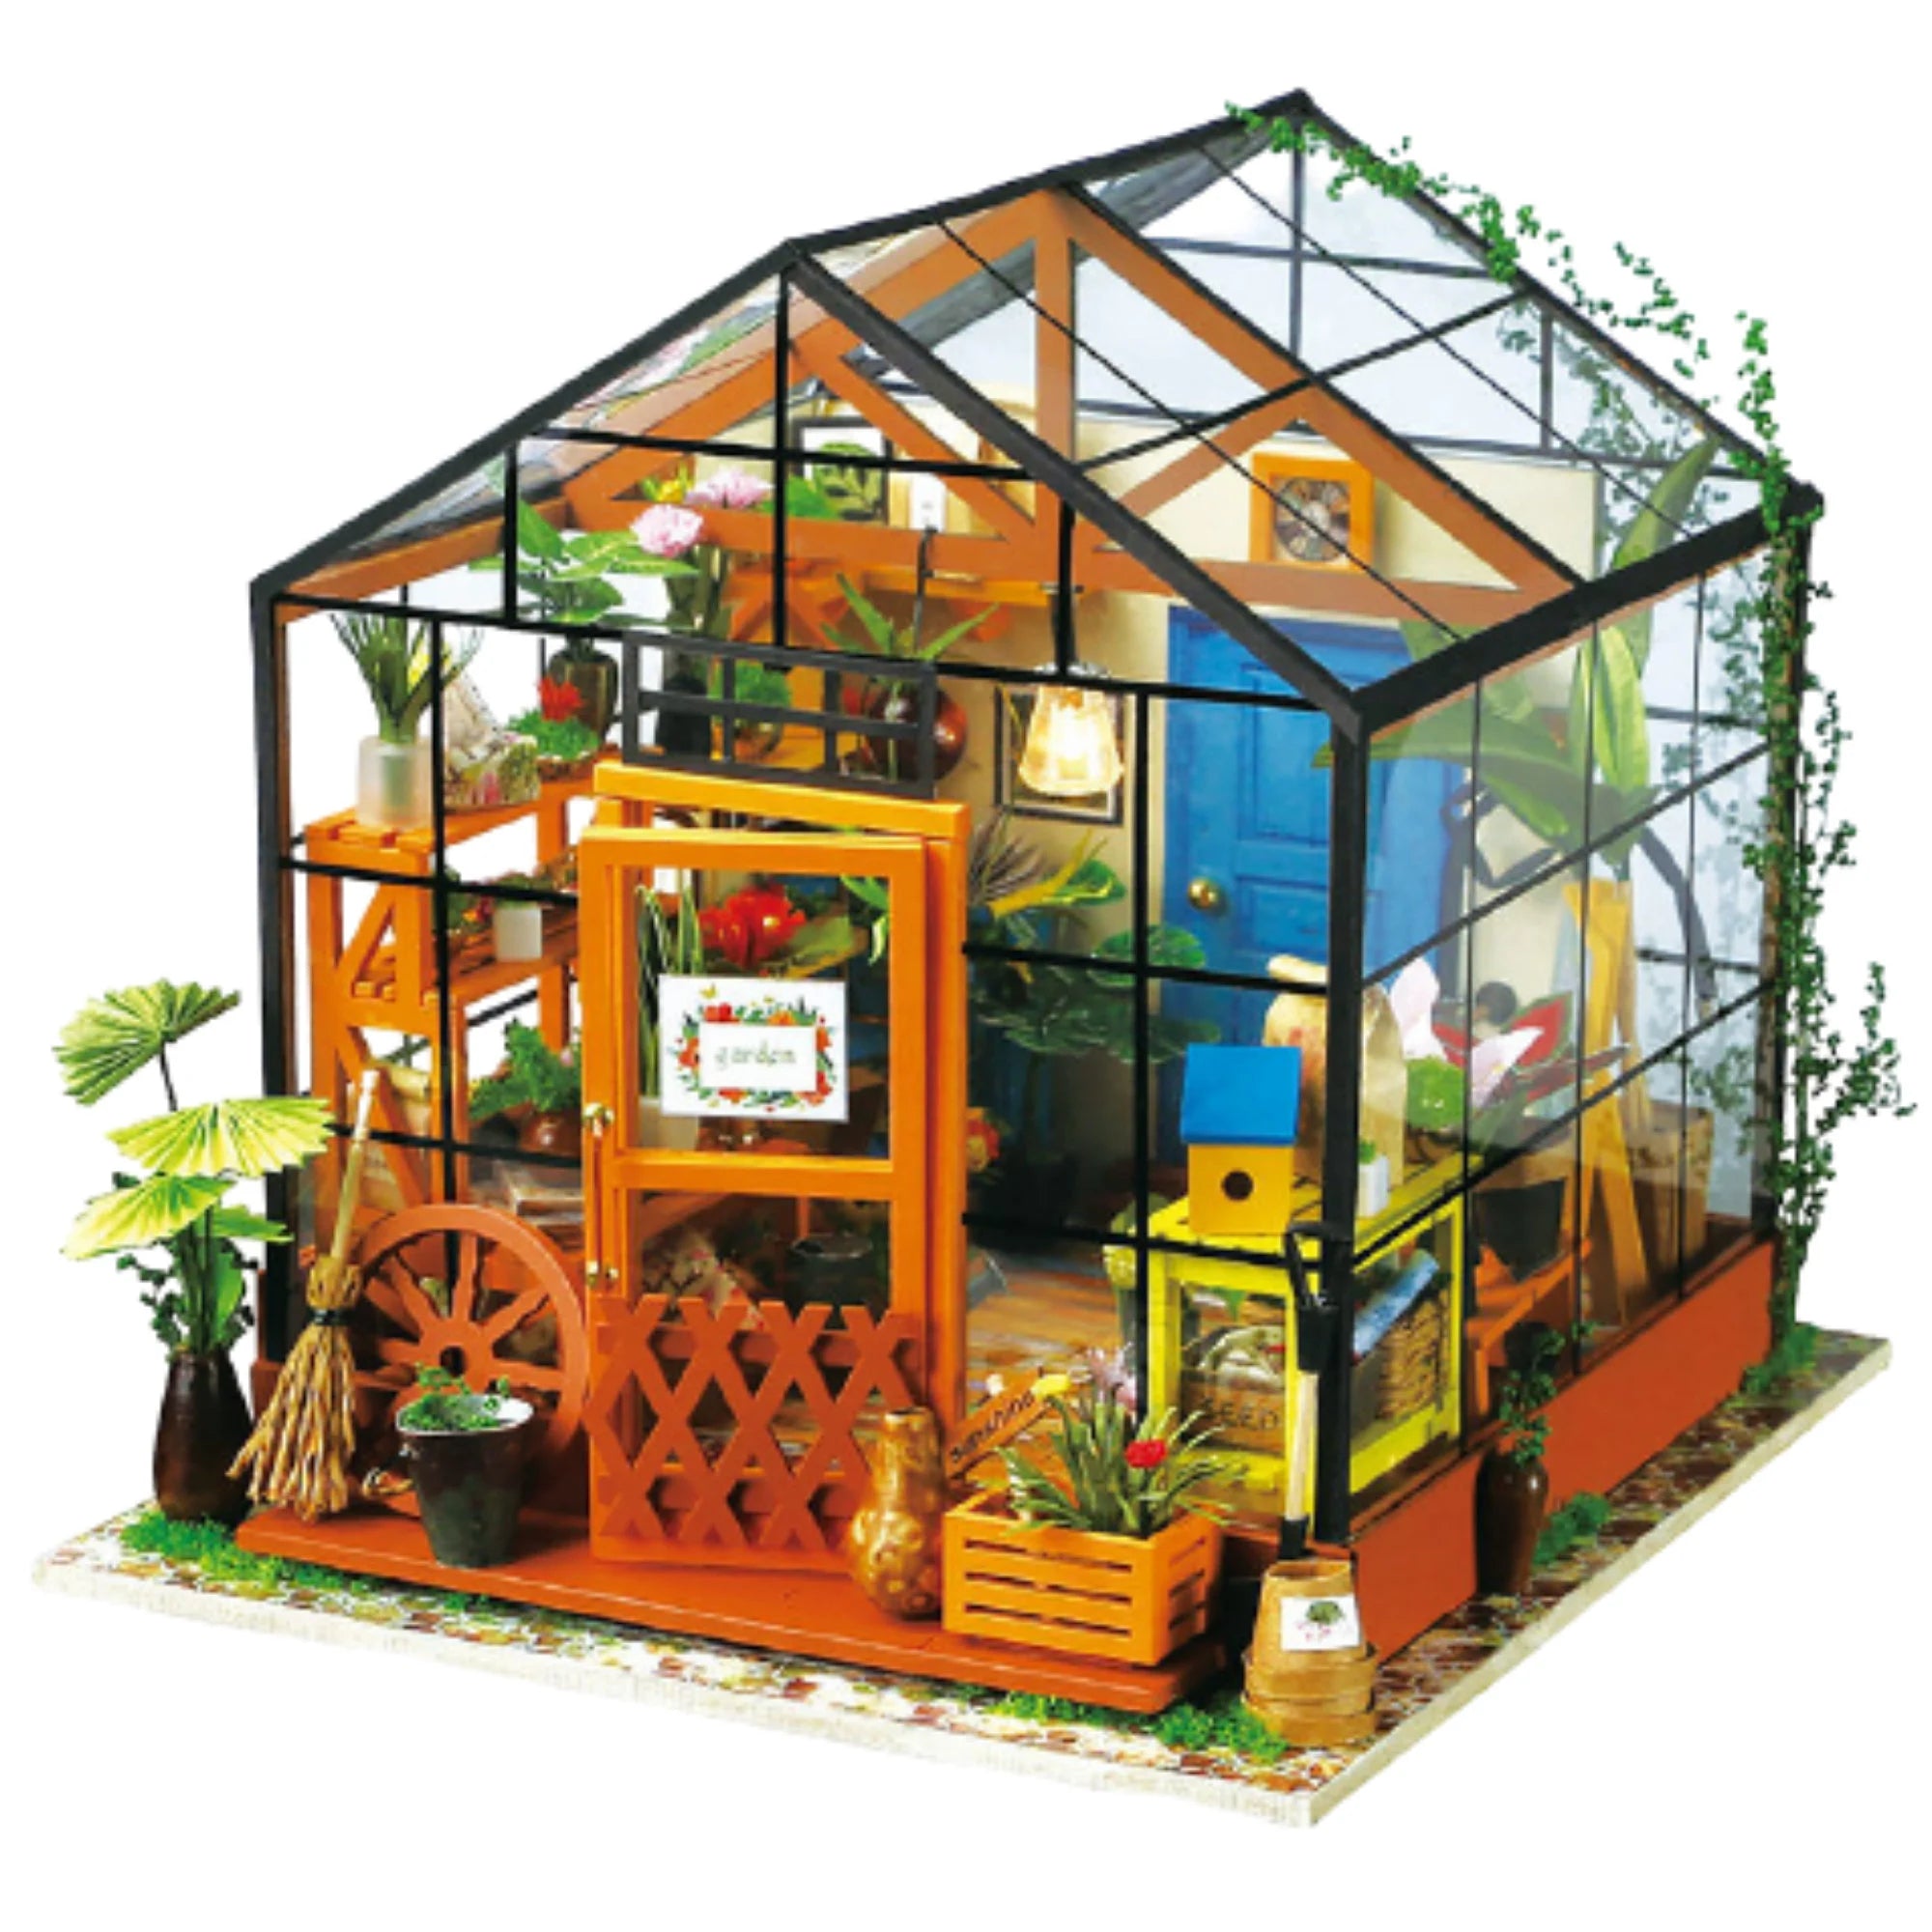 Miniature House · Kesey Greenhouse